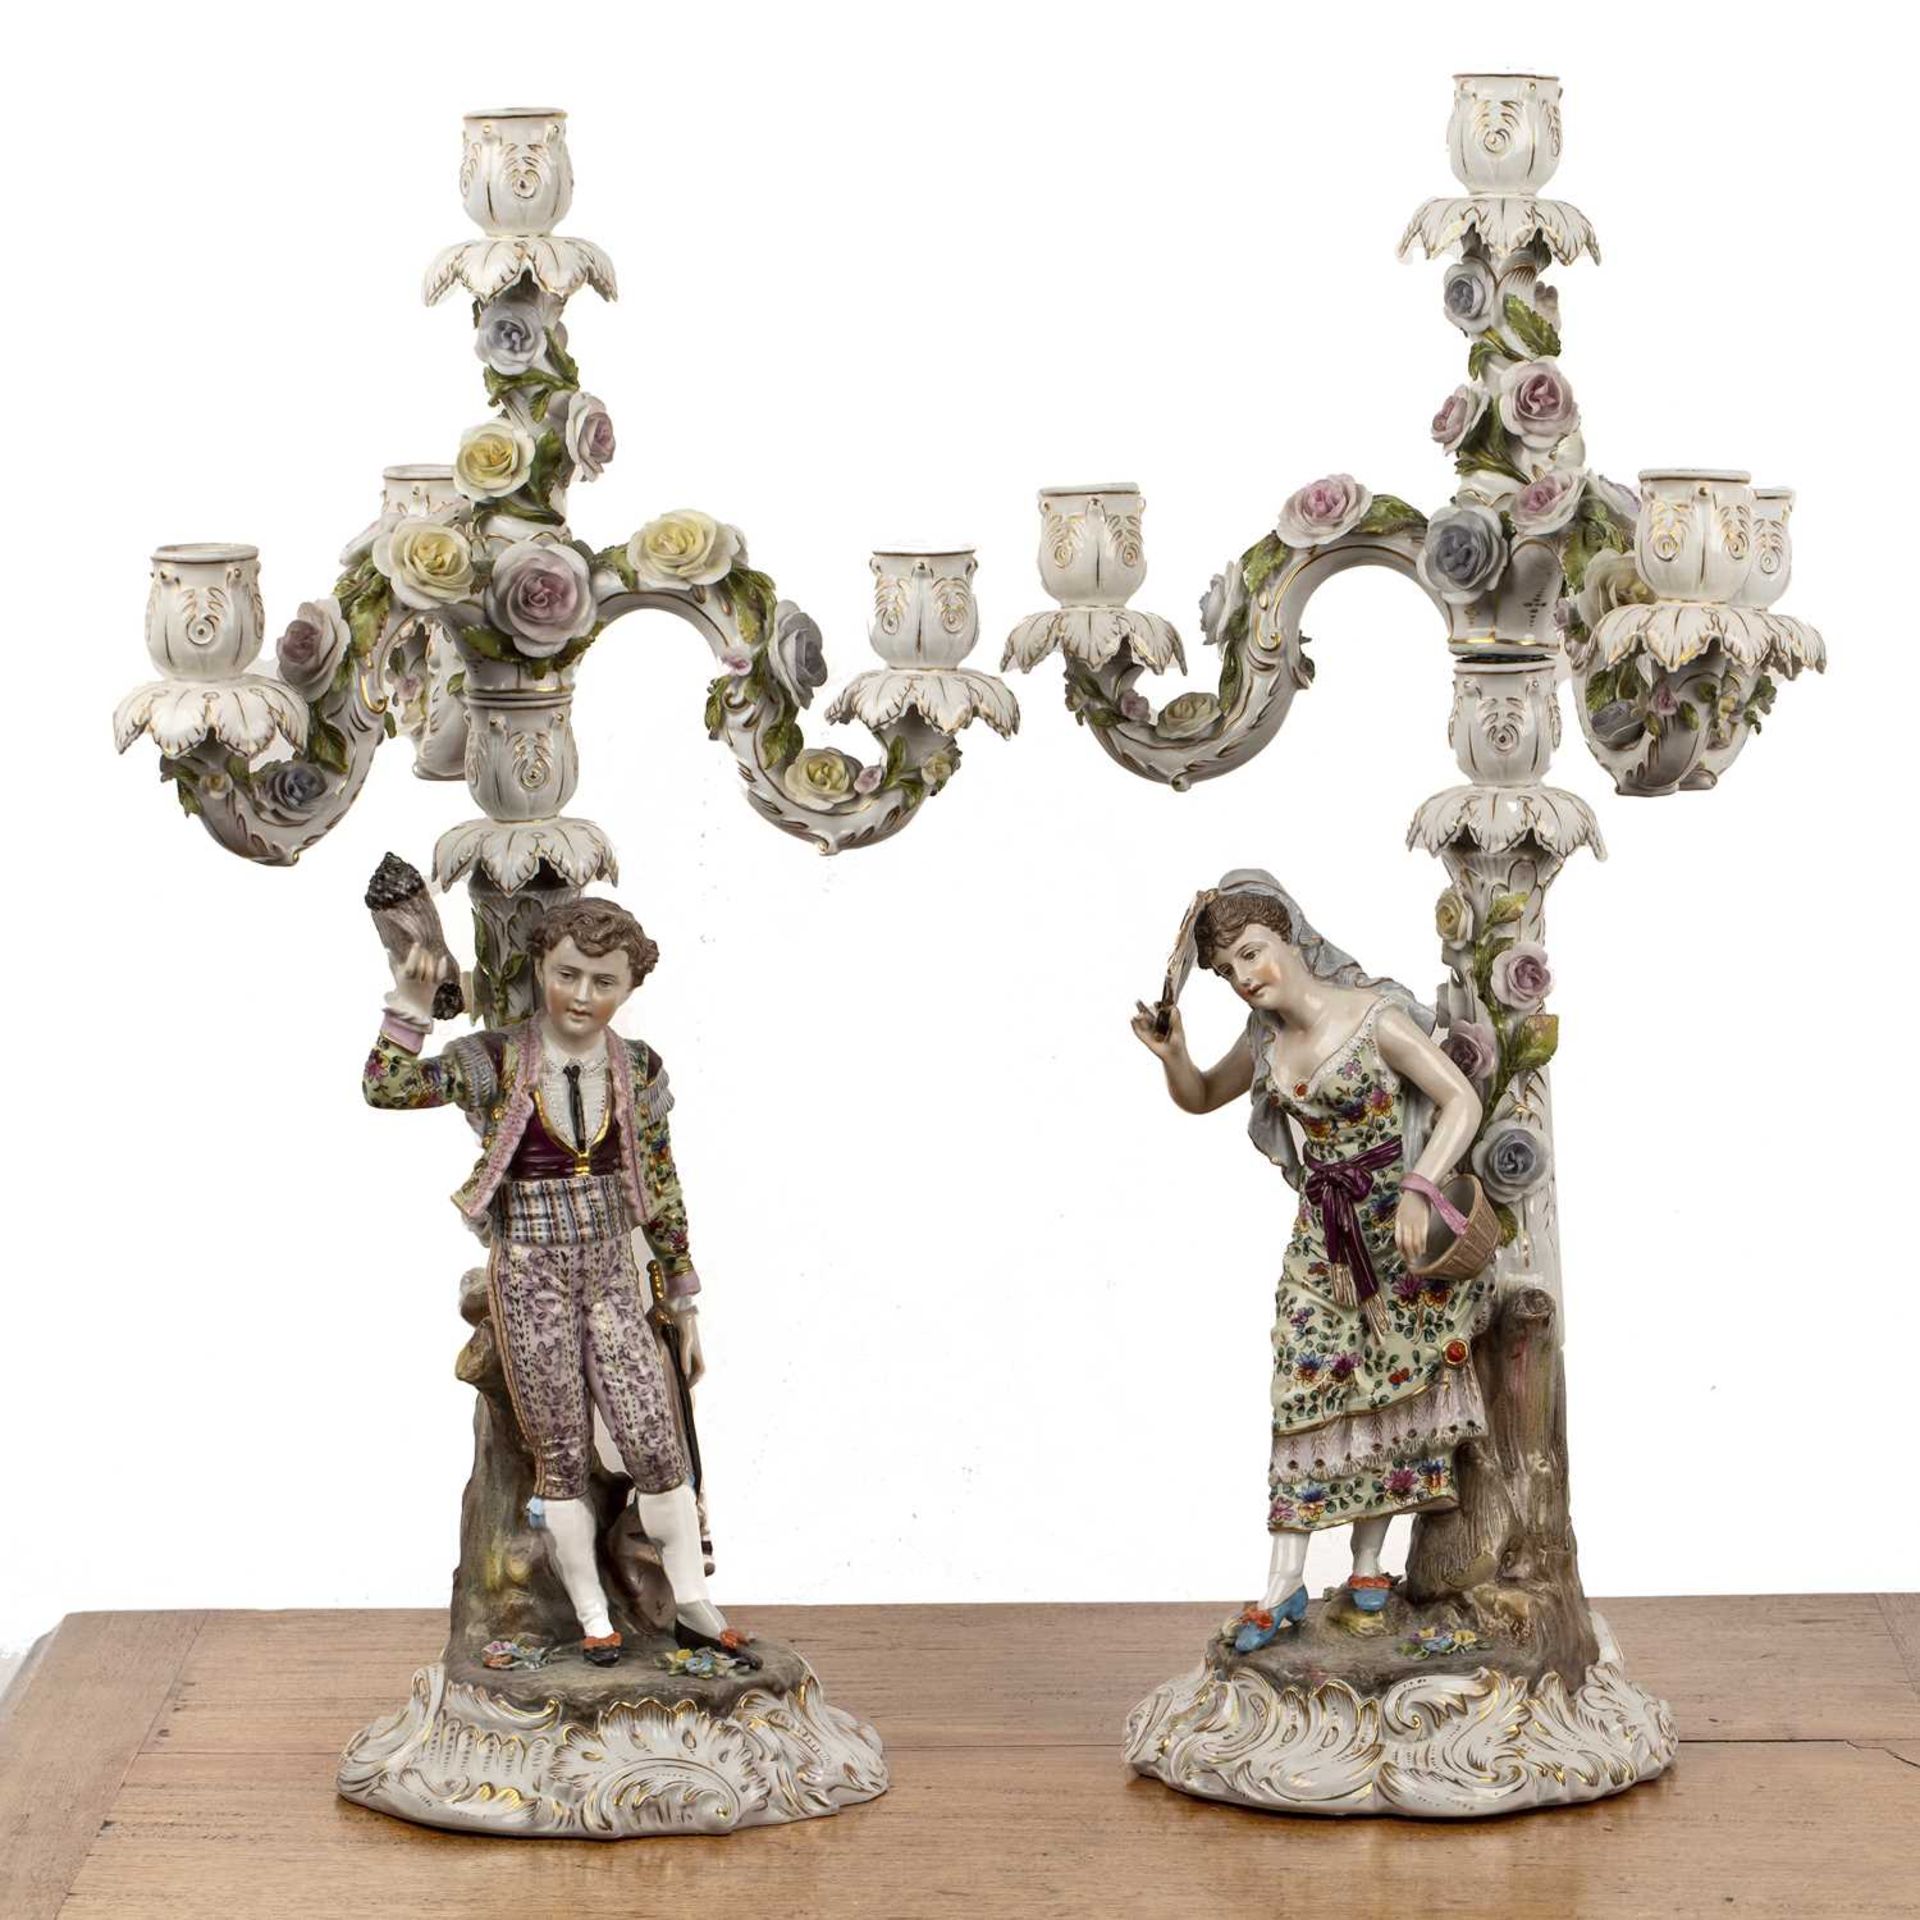 Pair of Triebner, ENS & Eckert (Volkstedt) porcelain candlesticks with figural decoration, flowers